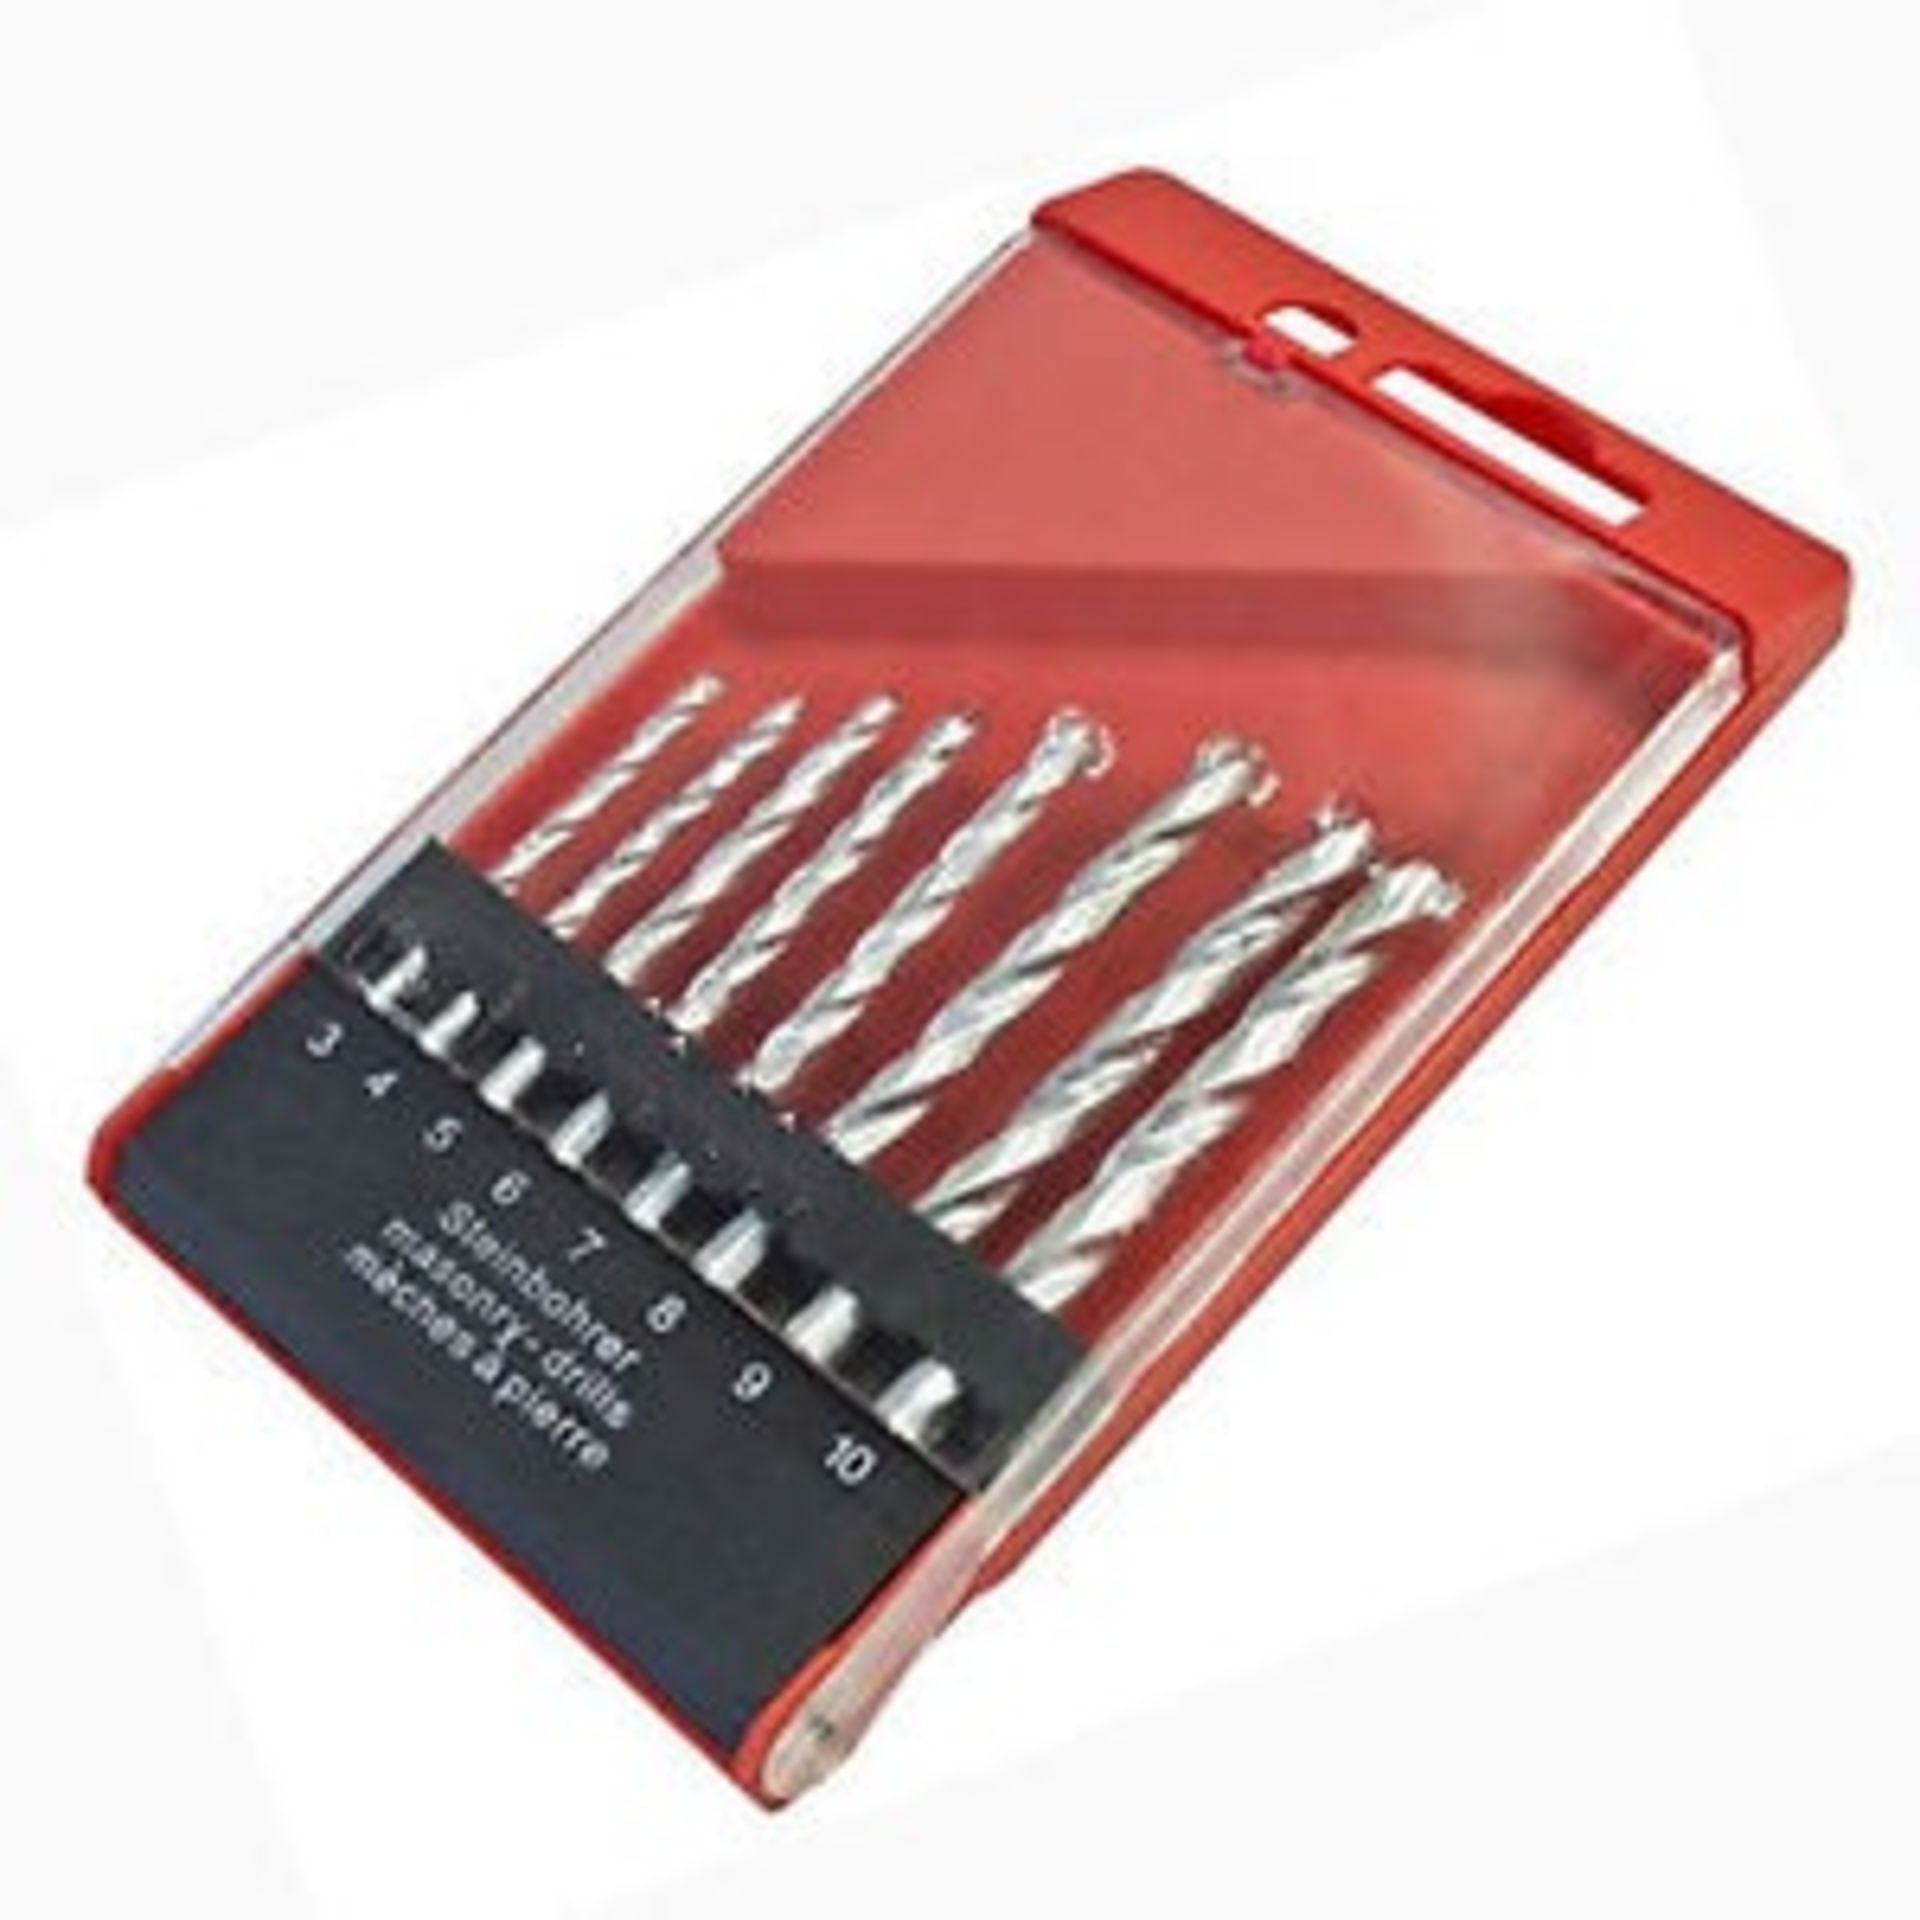 V *TRADE QTY* Brand New 8pc Masonry Drill Bit Set X 5 YOUR BID PRICE TO BE MULTIPLIED BY FIVE